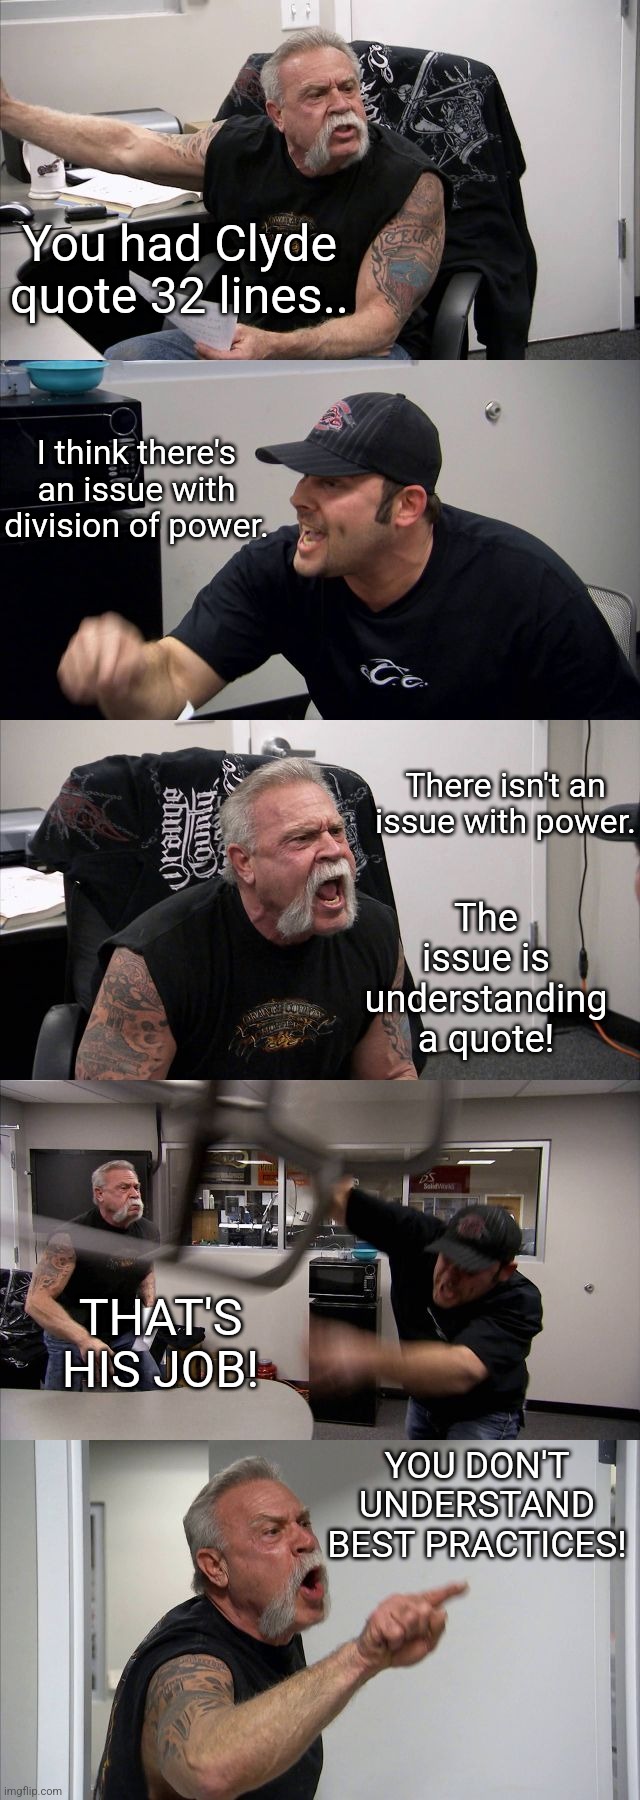 A War That Happened At My Office | You had Clyde quote 32 lines.. I think there's an issue with division of power. There isn't an issue with power. The issue is understanding a quote! THAT'S HIS JOB! YOU DON'T UNDERSTAND BEST PRACTICES! | image tagged in memes,american chopper argument,coworkers | made w/ Imgflip meme maker